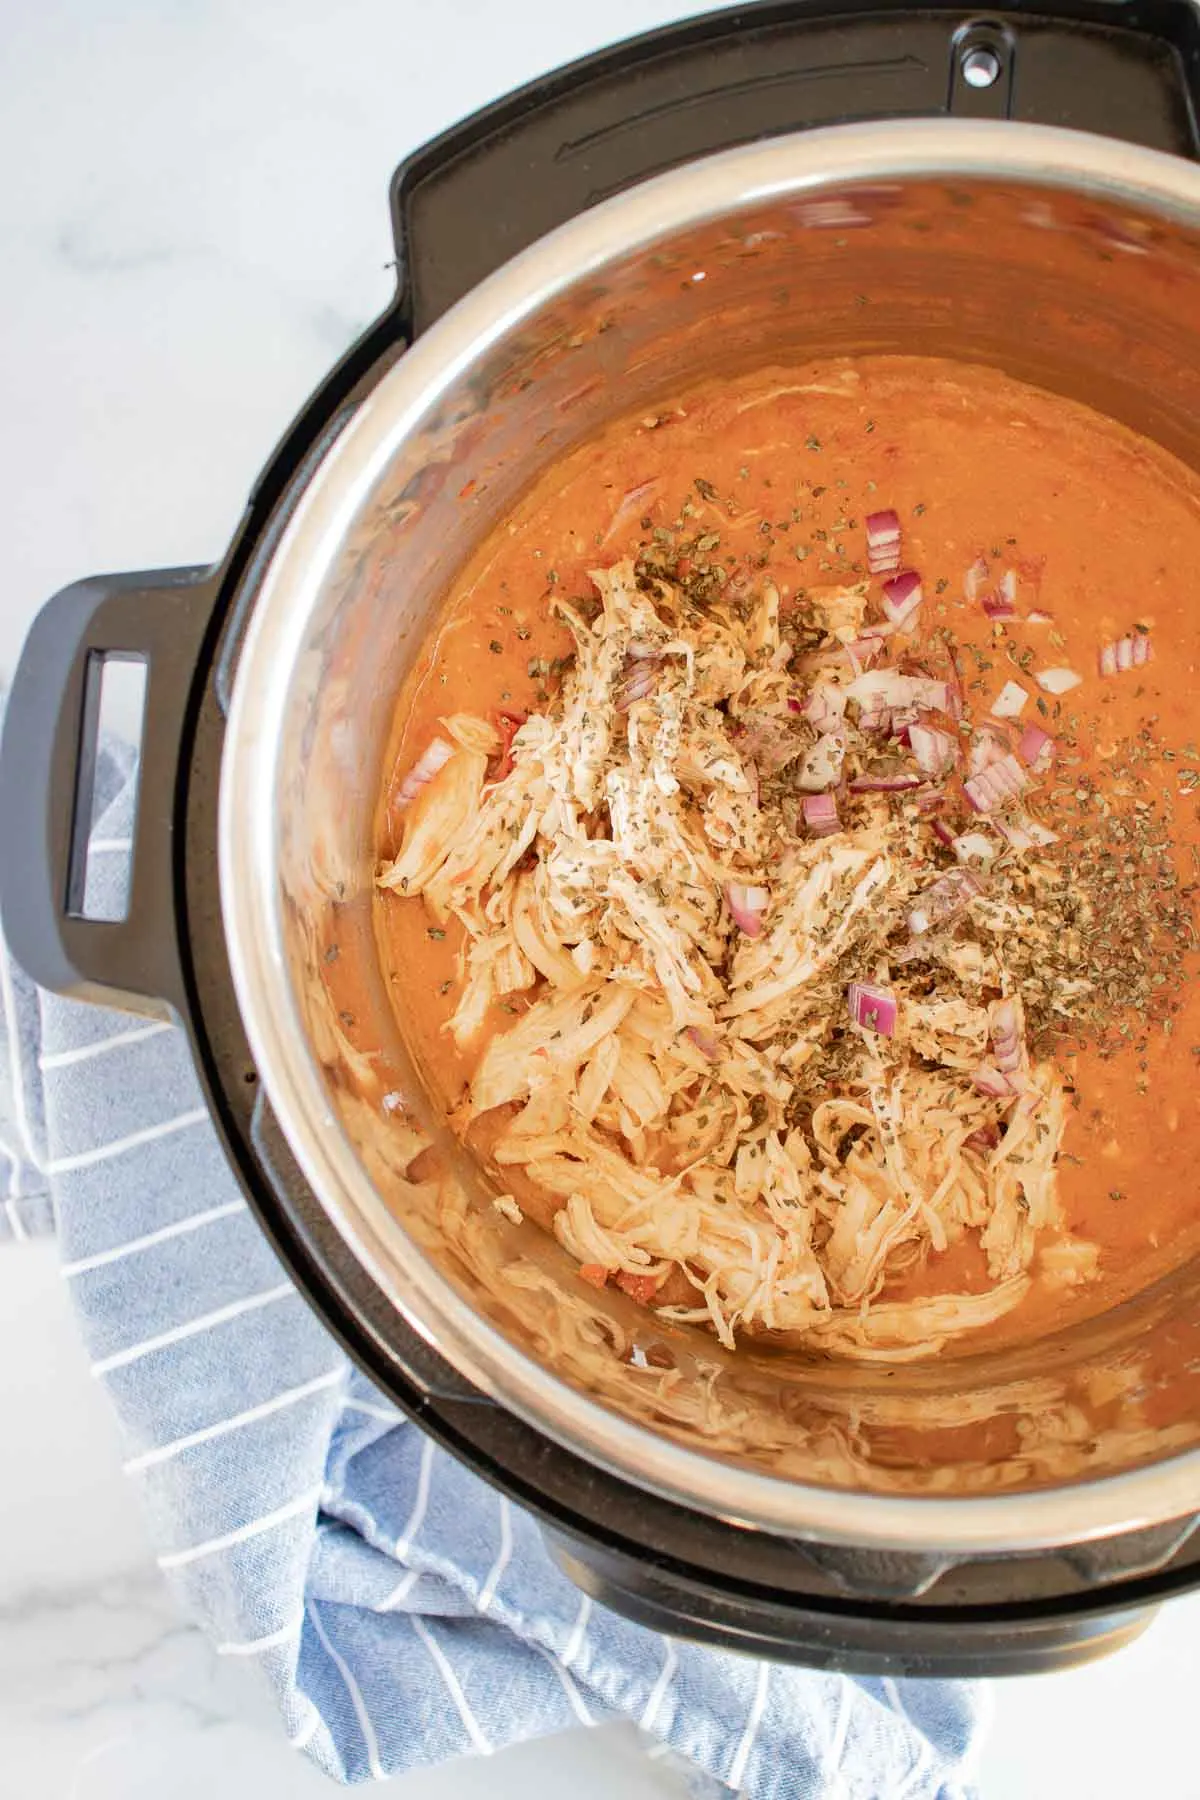 Shred the Thai chicken and return it to the Instant Pot.